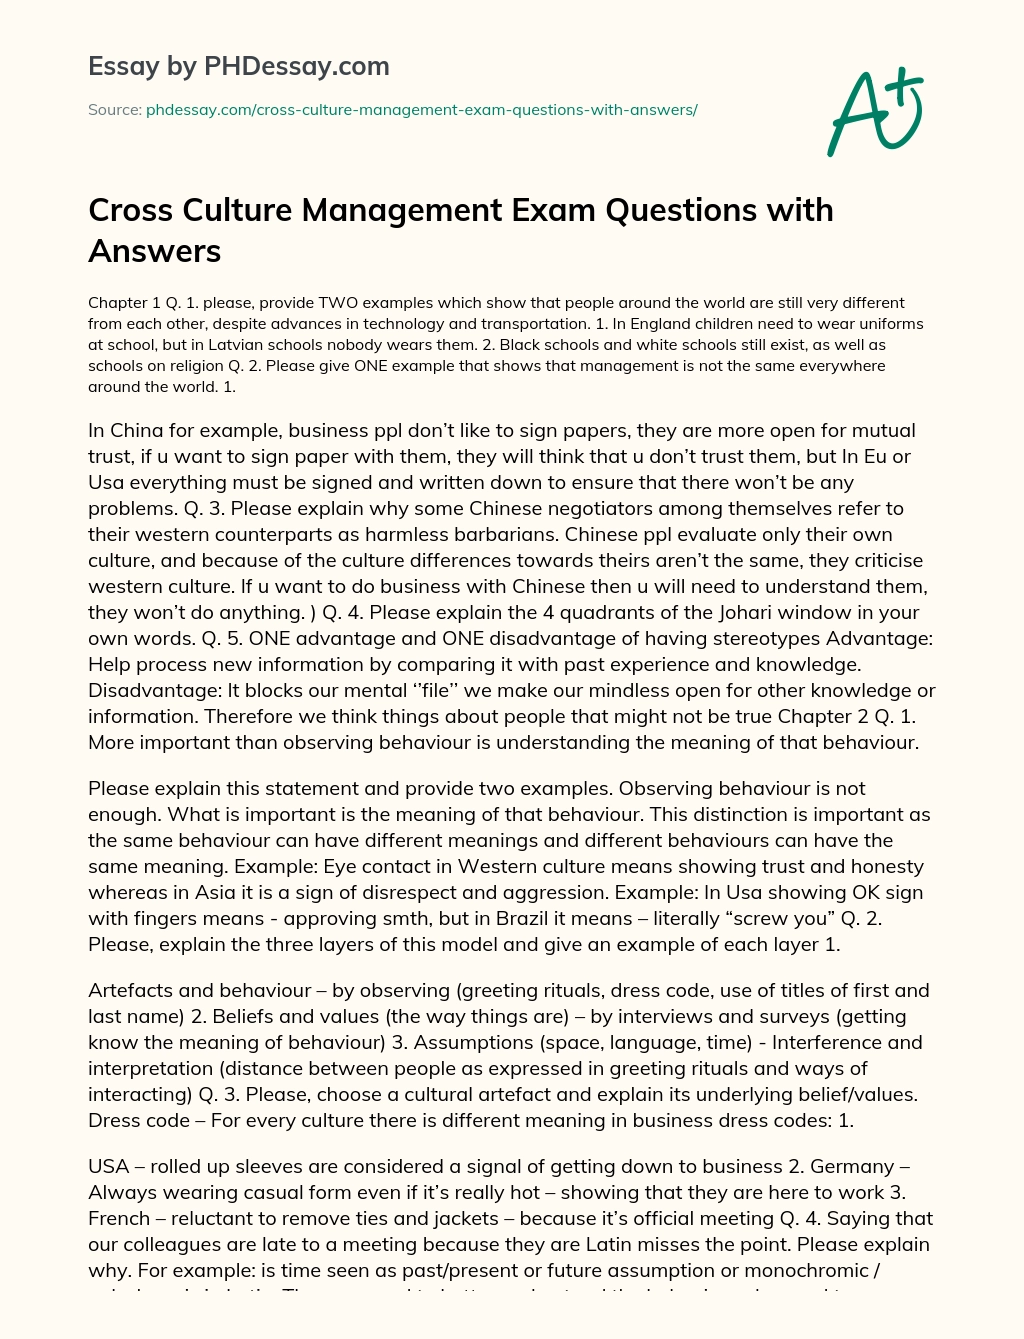 Cross Culture Management Exam Questions with Answers essay